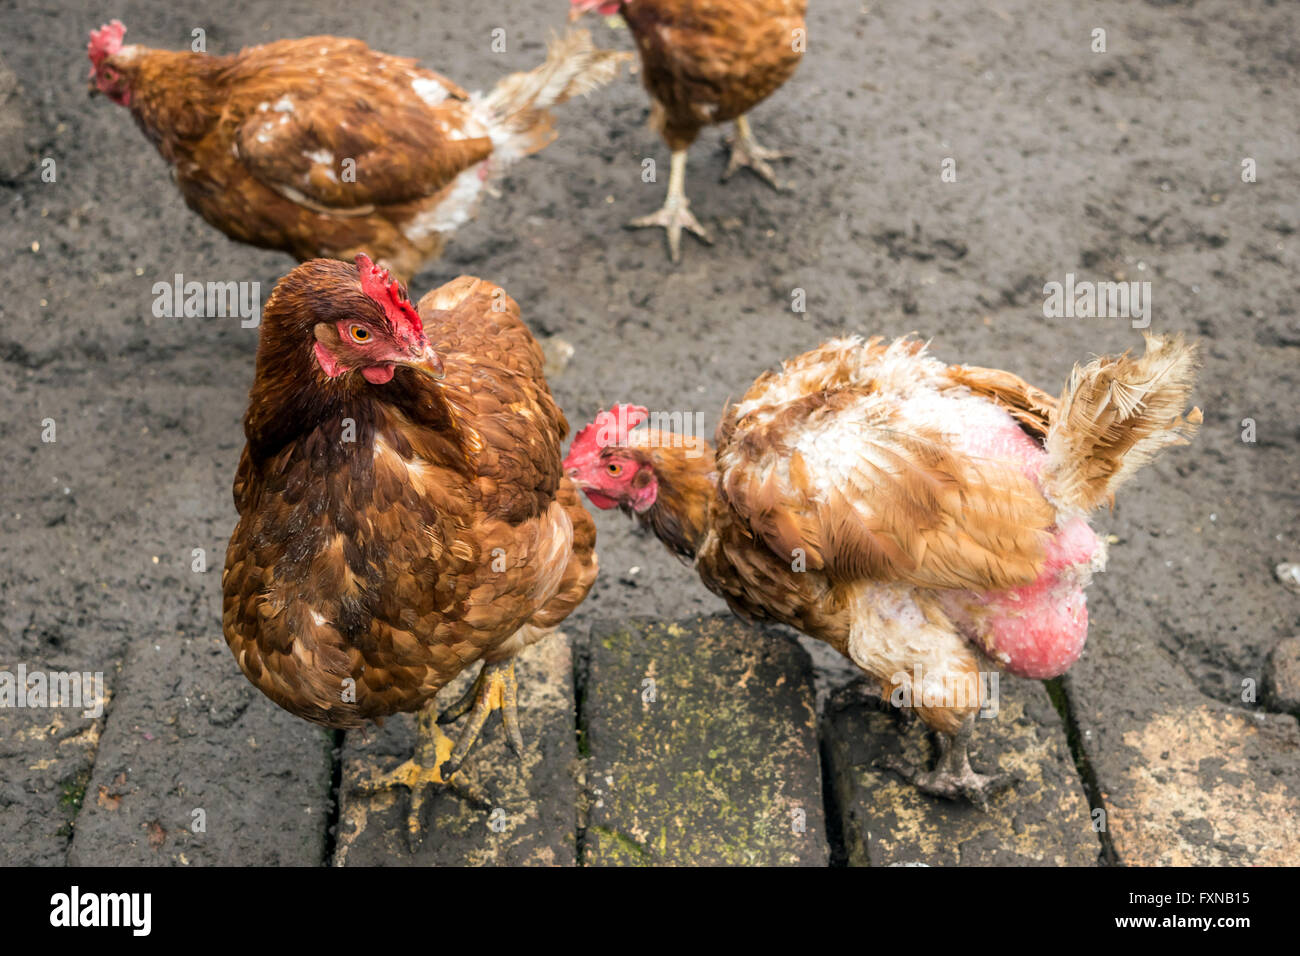 Hen pecking, feather eating, cannibalism (Social behaviour to establish a position in social hierarchy) Stock Photo